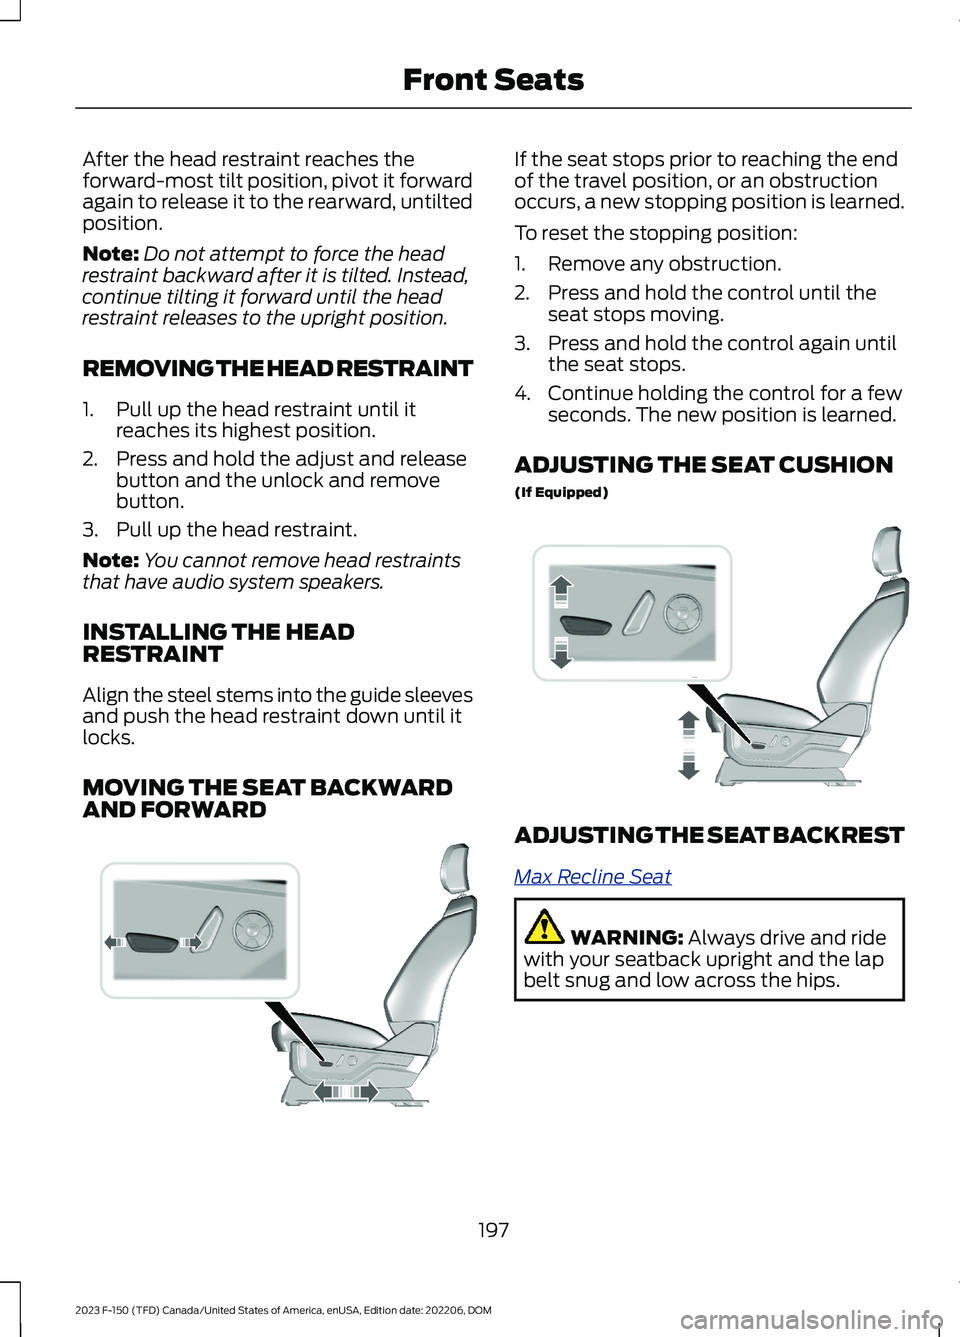 FORD F150 2023  Owners Manual After the head restraint reaches theforward-most tilt position, pivot it forwardagain to release it to the rearward, untiltedposition.
Note:Do not attempt to force the headrestraint backward after it 